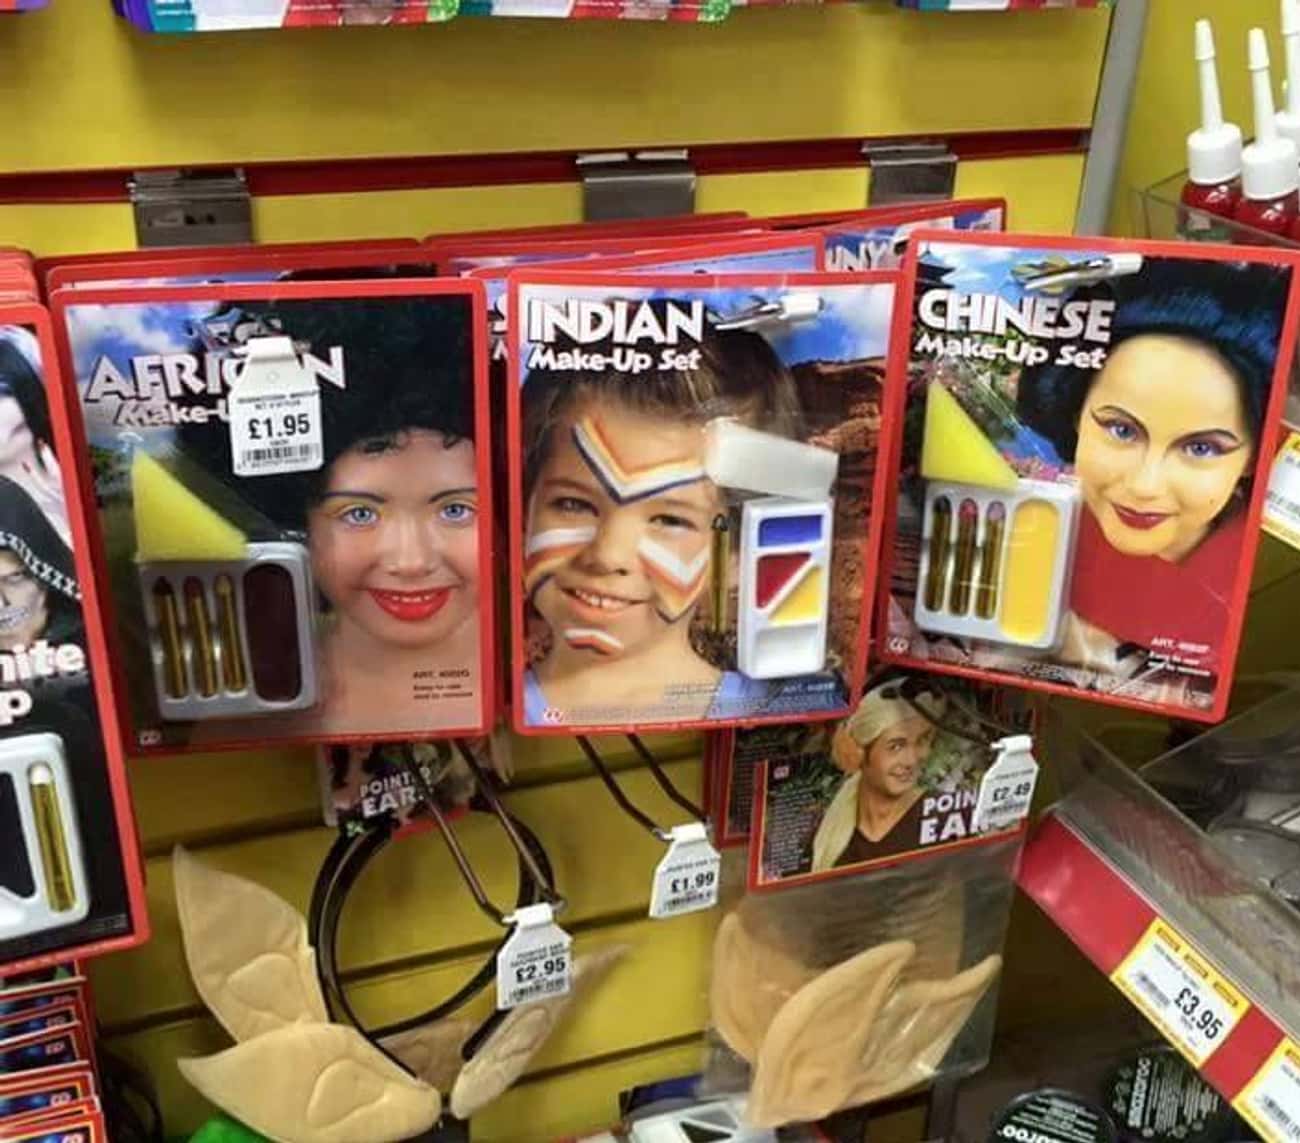 Wildly Racist Costume Make-Up